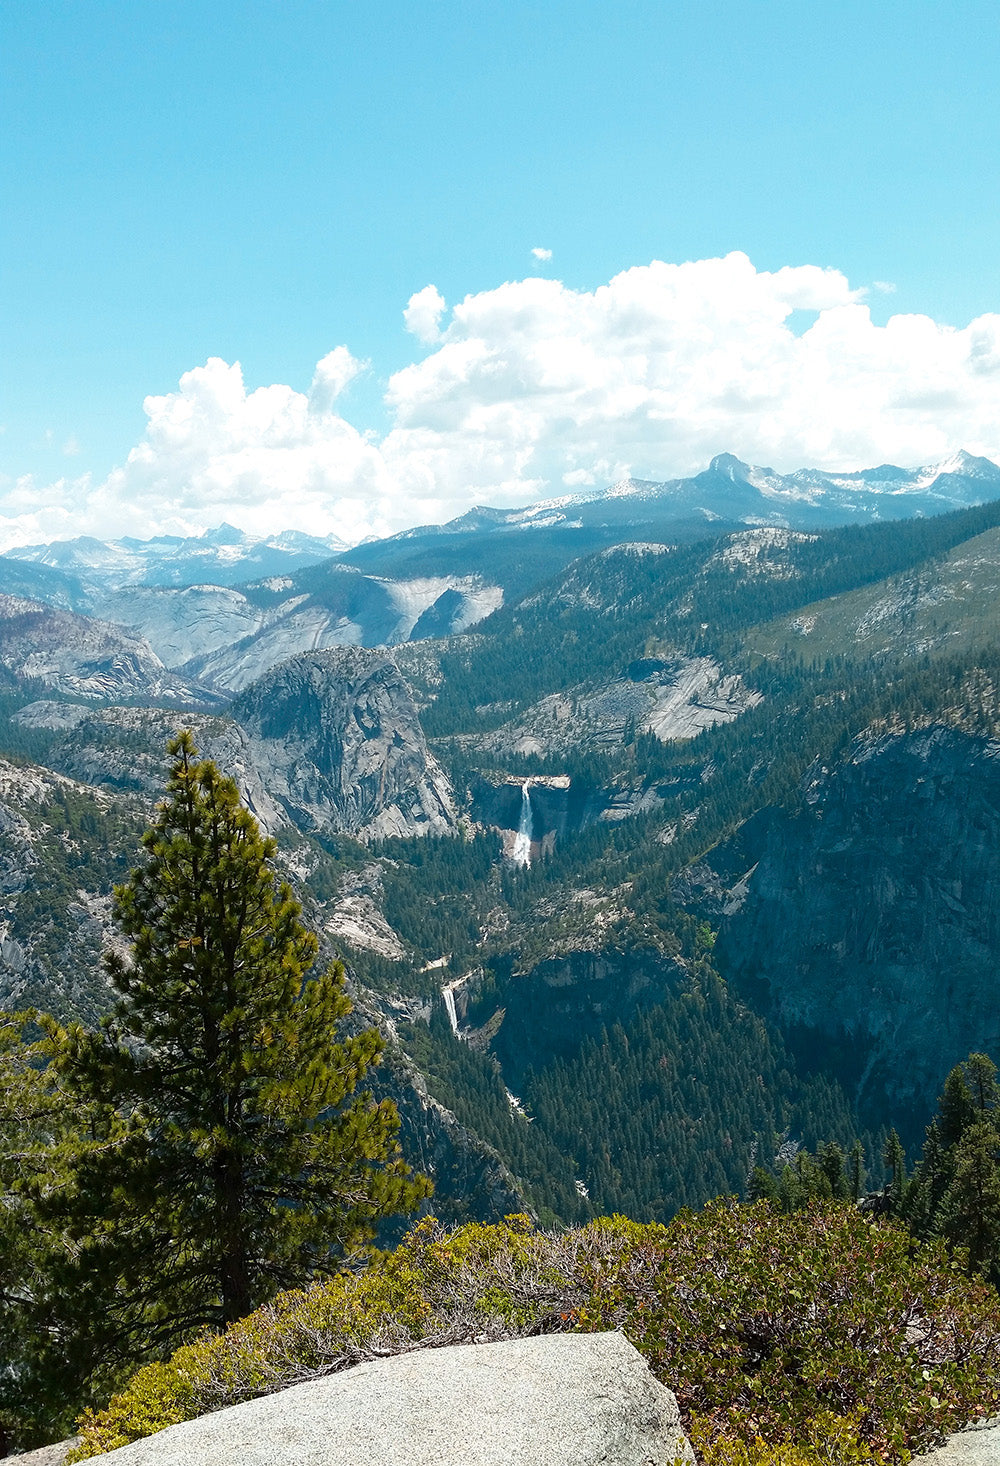 Looking down onto Yosemite Valley from Glacier Point via Davis Taylor Trading Co.